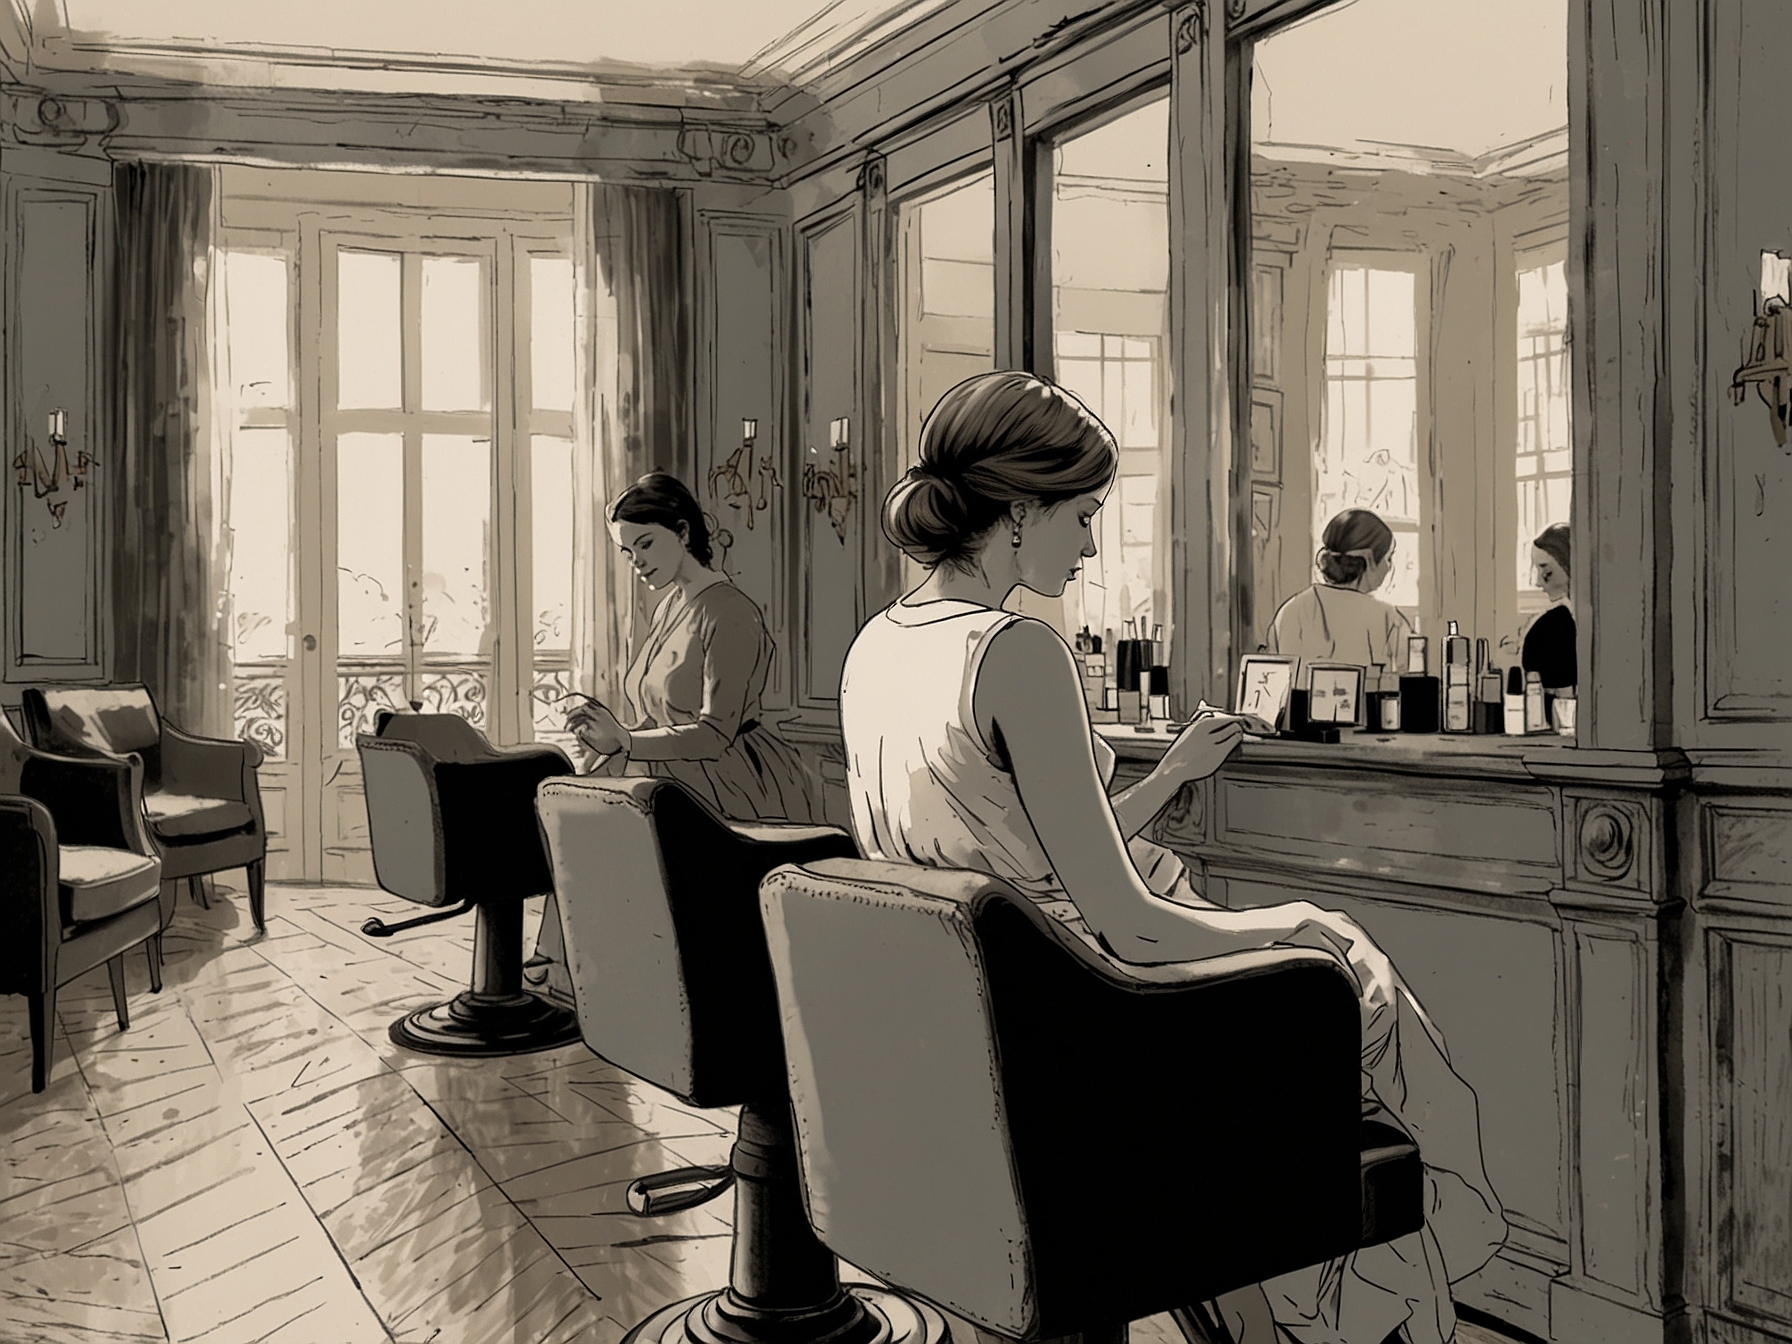 A corner of a Parisian salon with a stylist applying a natural-looking color treatment, emphasizing the bespoke and personalized service offered.